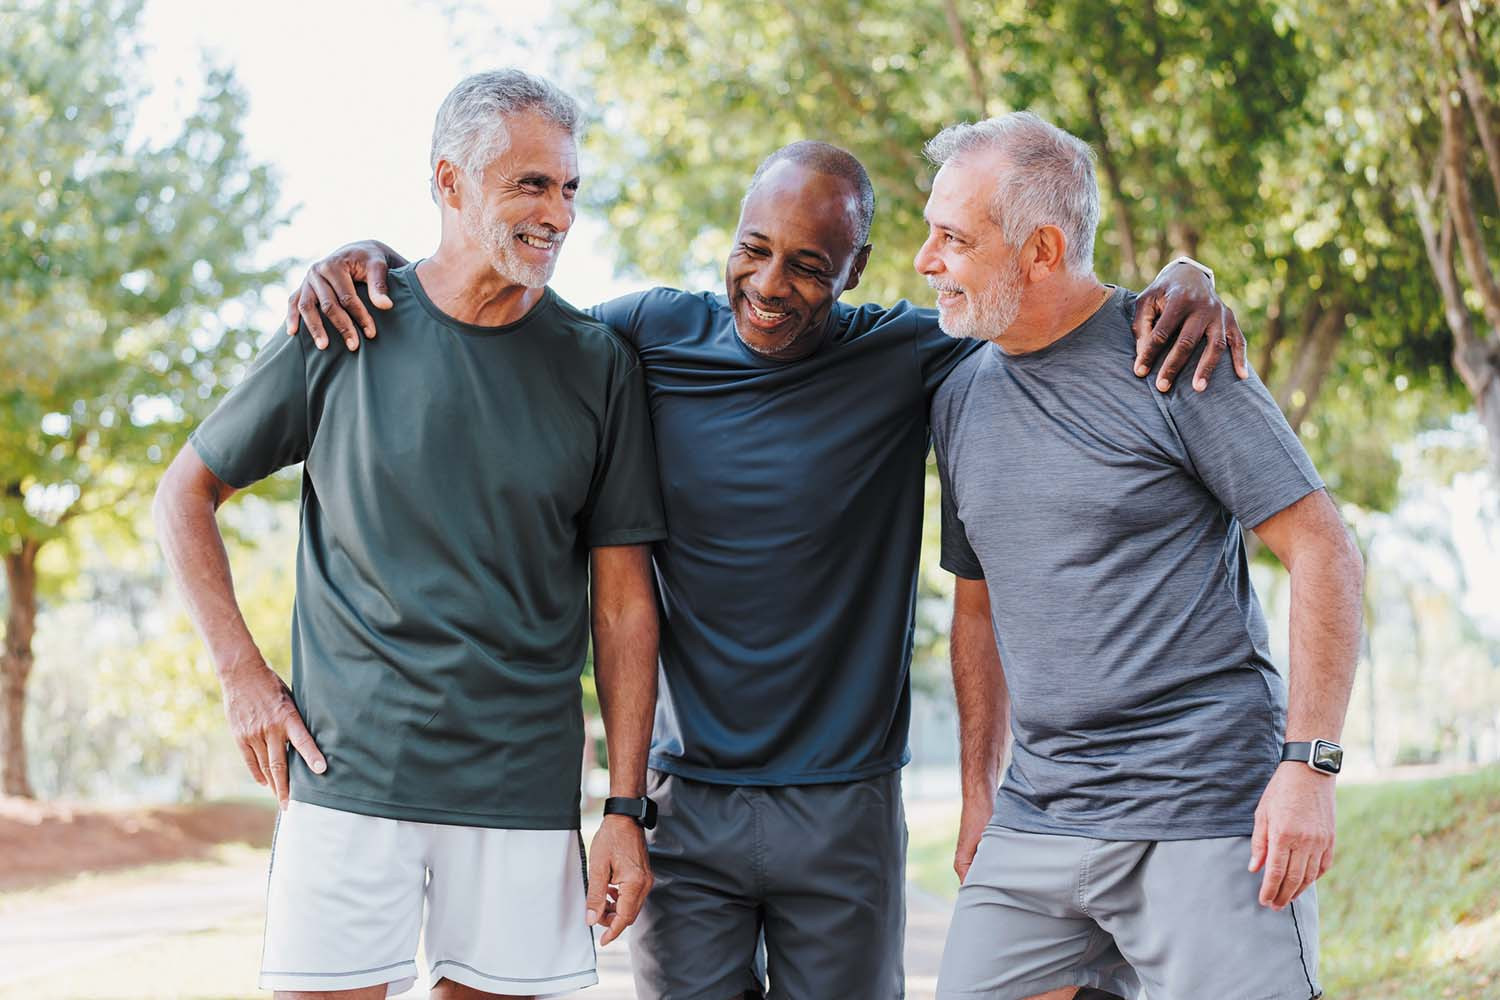 photo of three mature men standing together in exercise clothing; background looks like a park